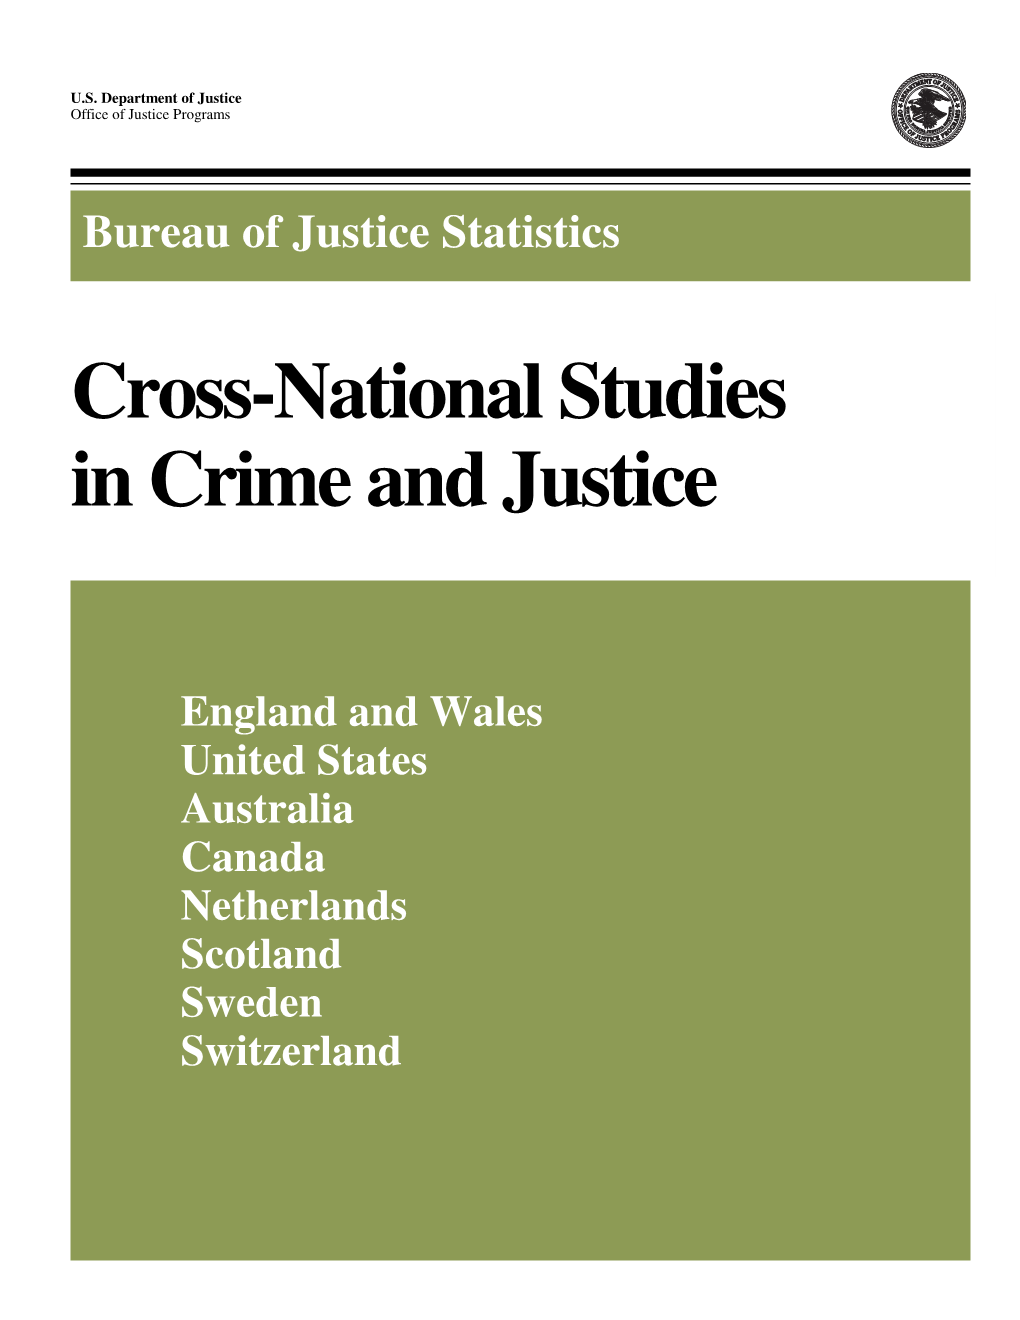 Cross-National Studies in Crime and Justice